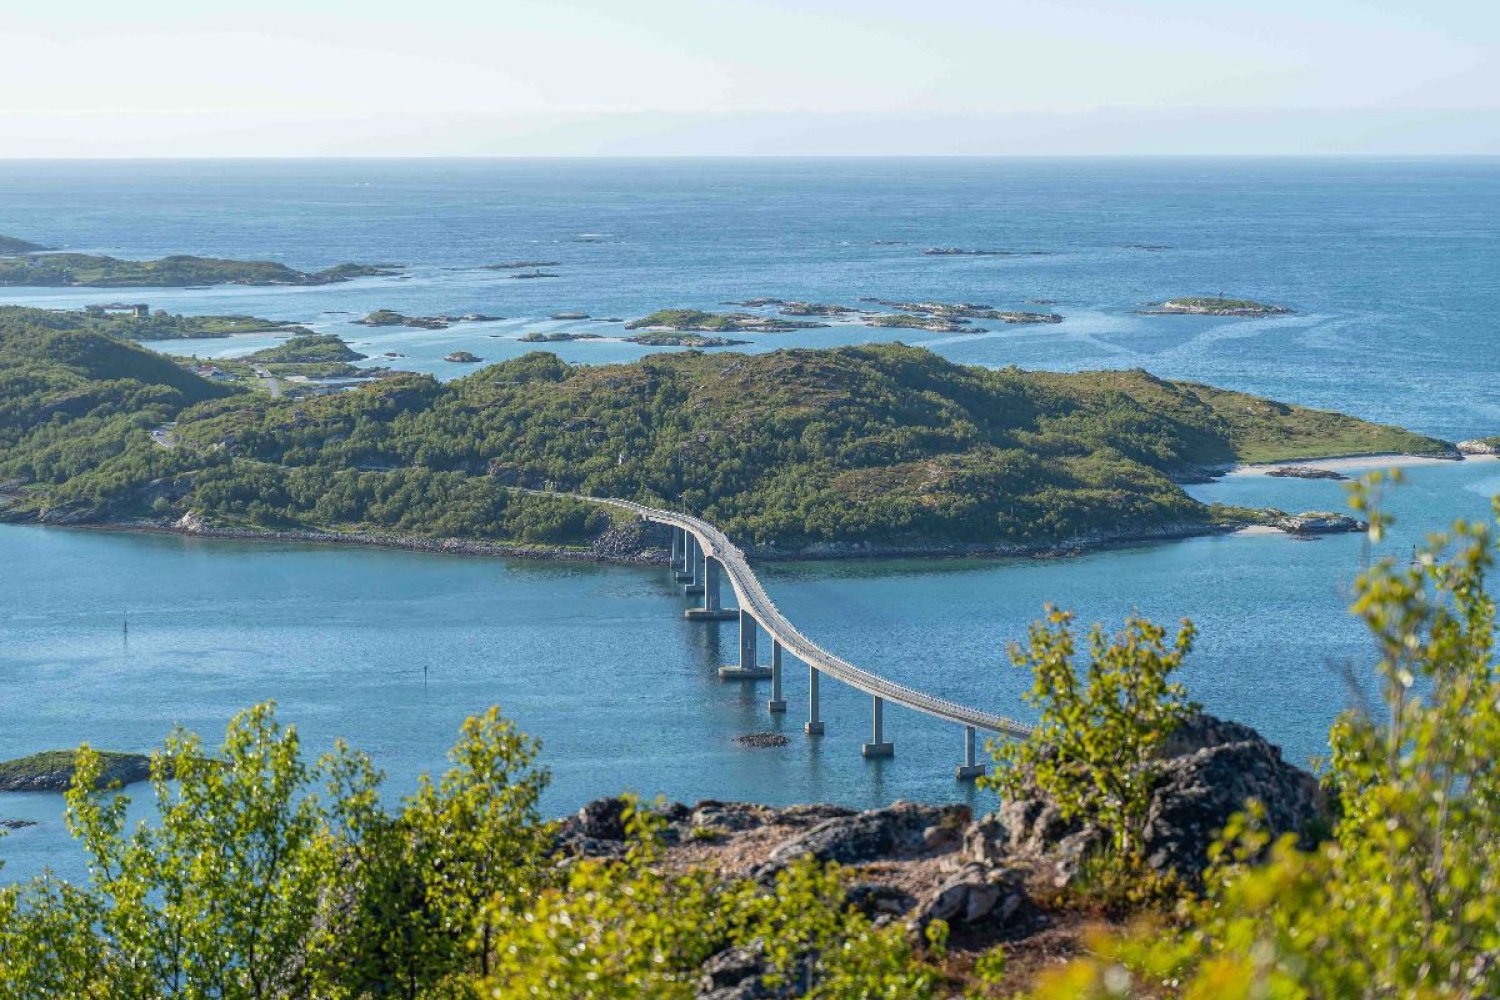 the view towards Sommarøy and the bridge